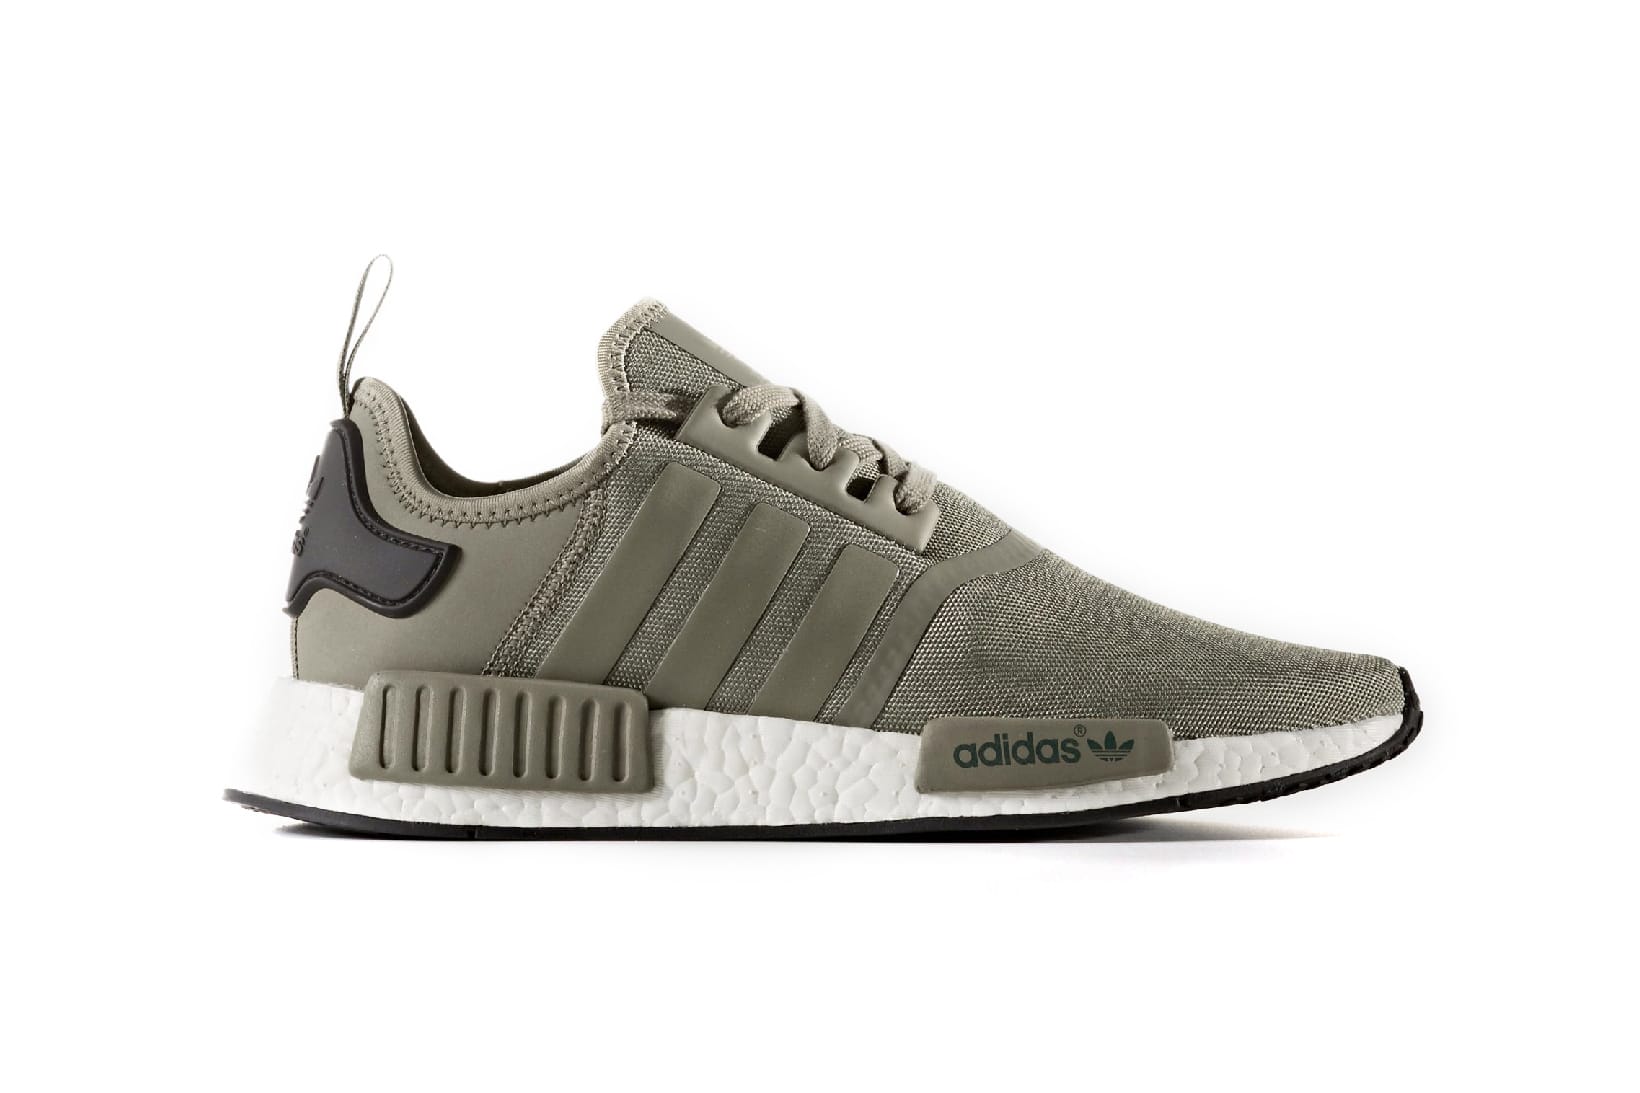 Nmd Xr1 And $ 300 On Stockx bump